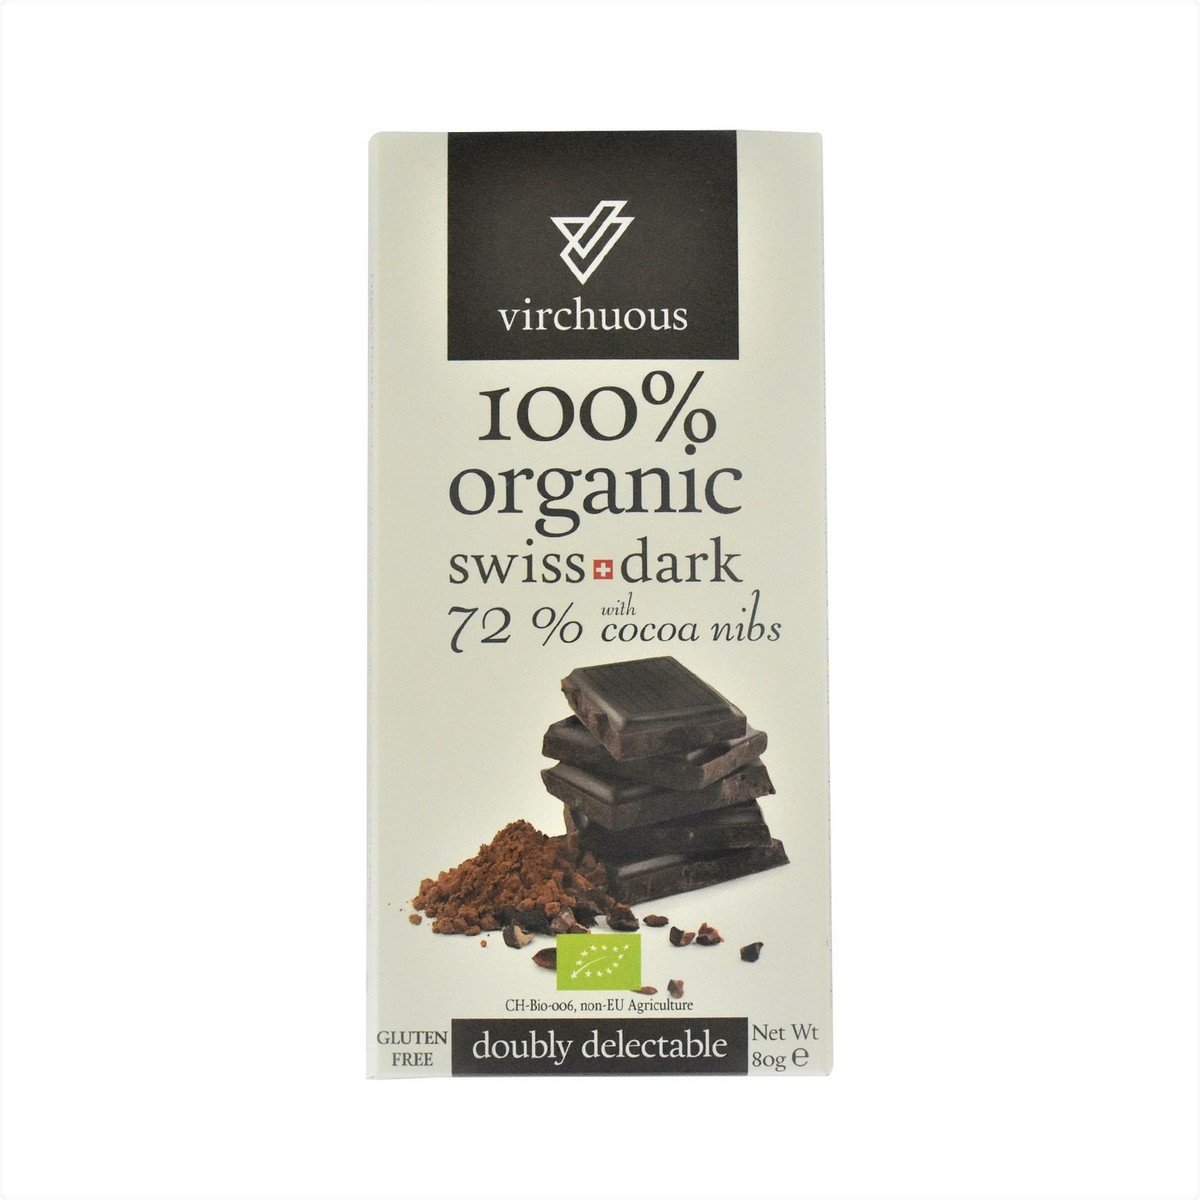 Virchuous  100% Organic Swiss Dark Chocolate with 72% Cocoa Nibs Gluten Free 80g